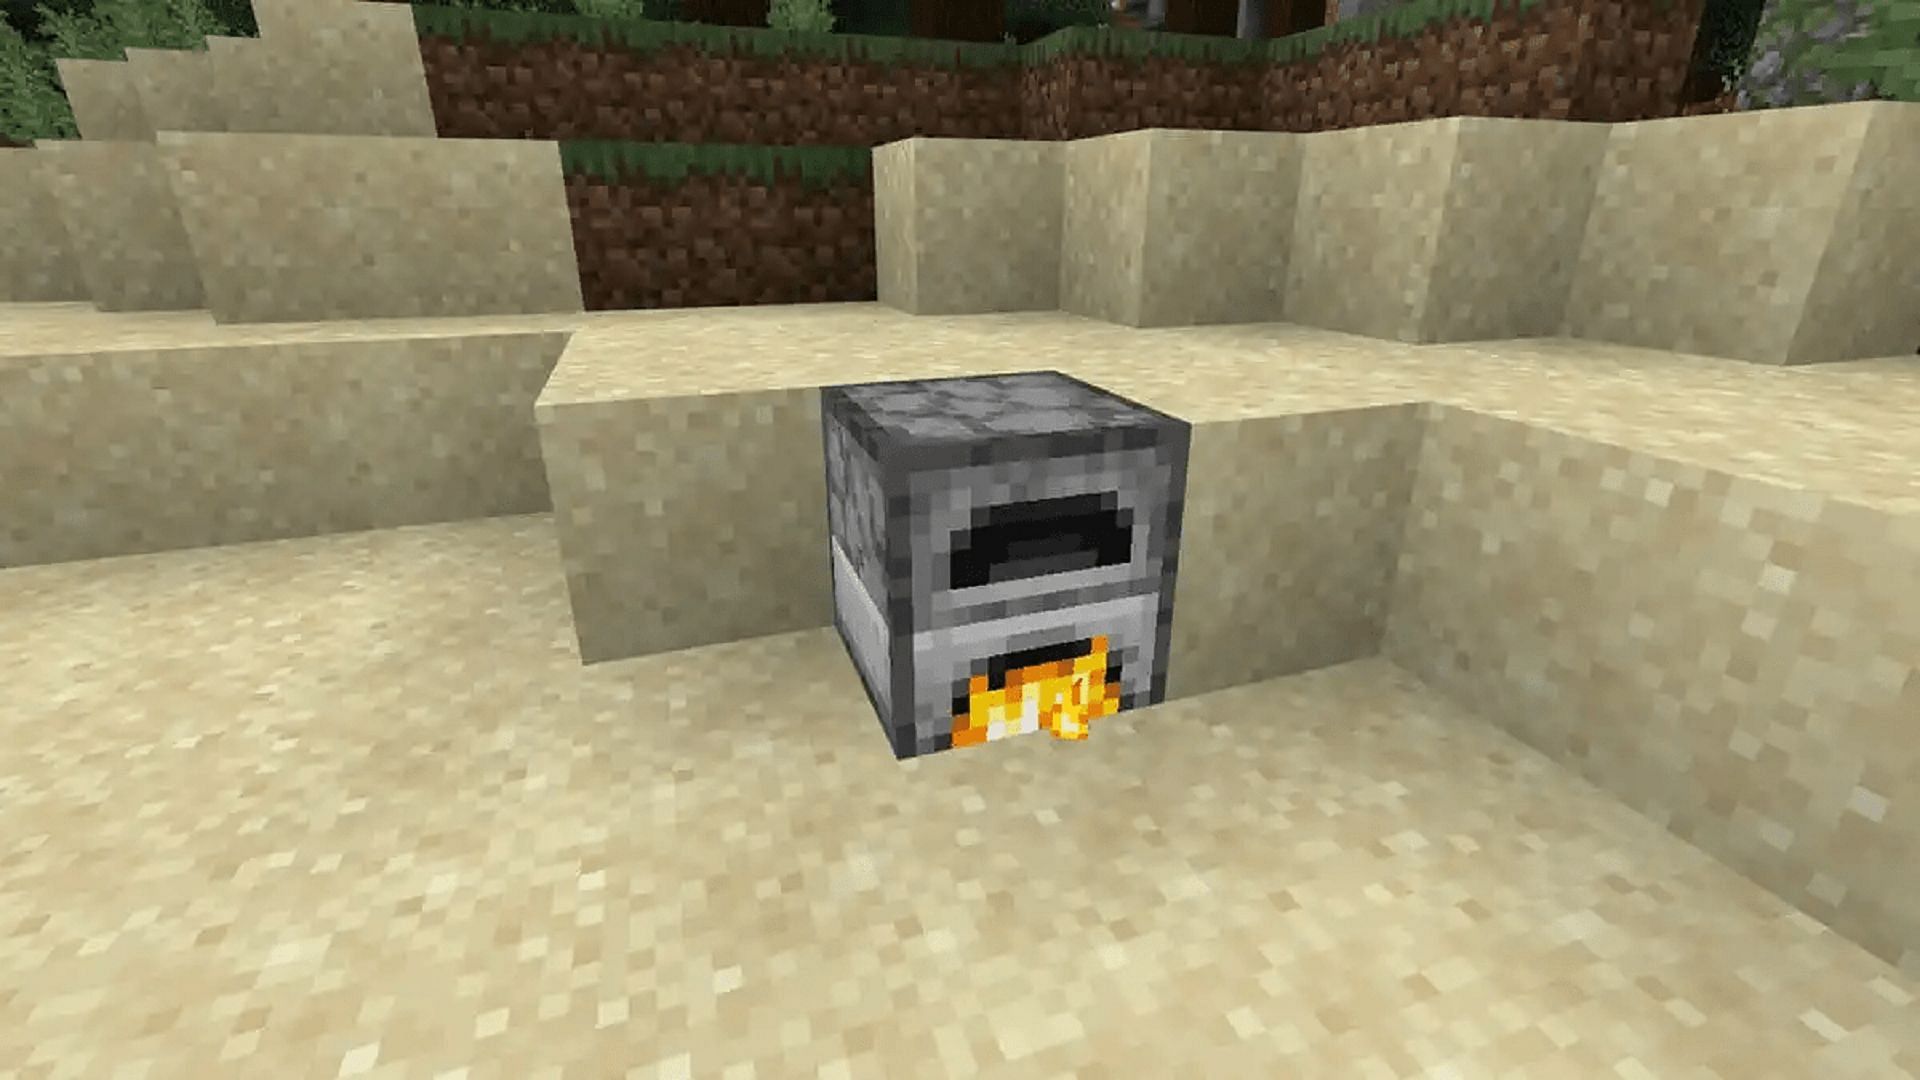 With a furnace and a crafting table, one Minecraft Redditor devised a new way to prepare a treat (Image via Mojang)